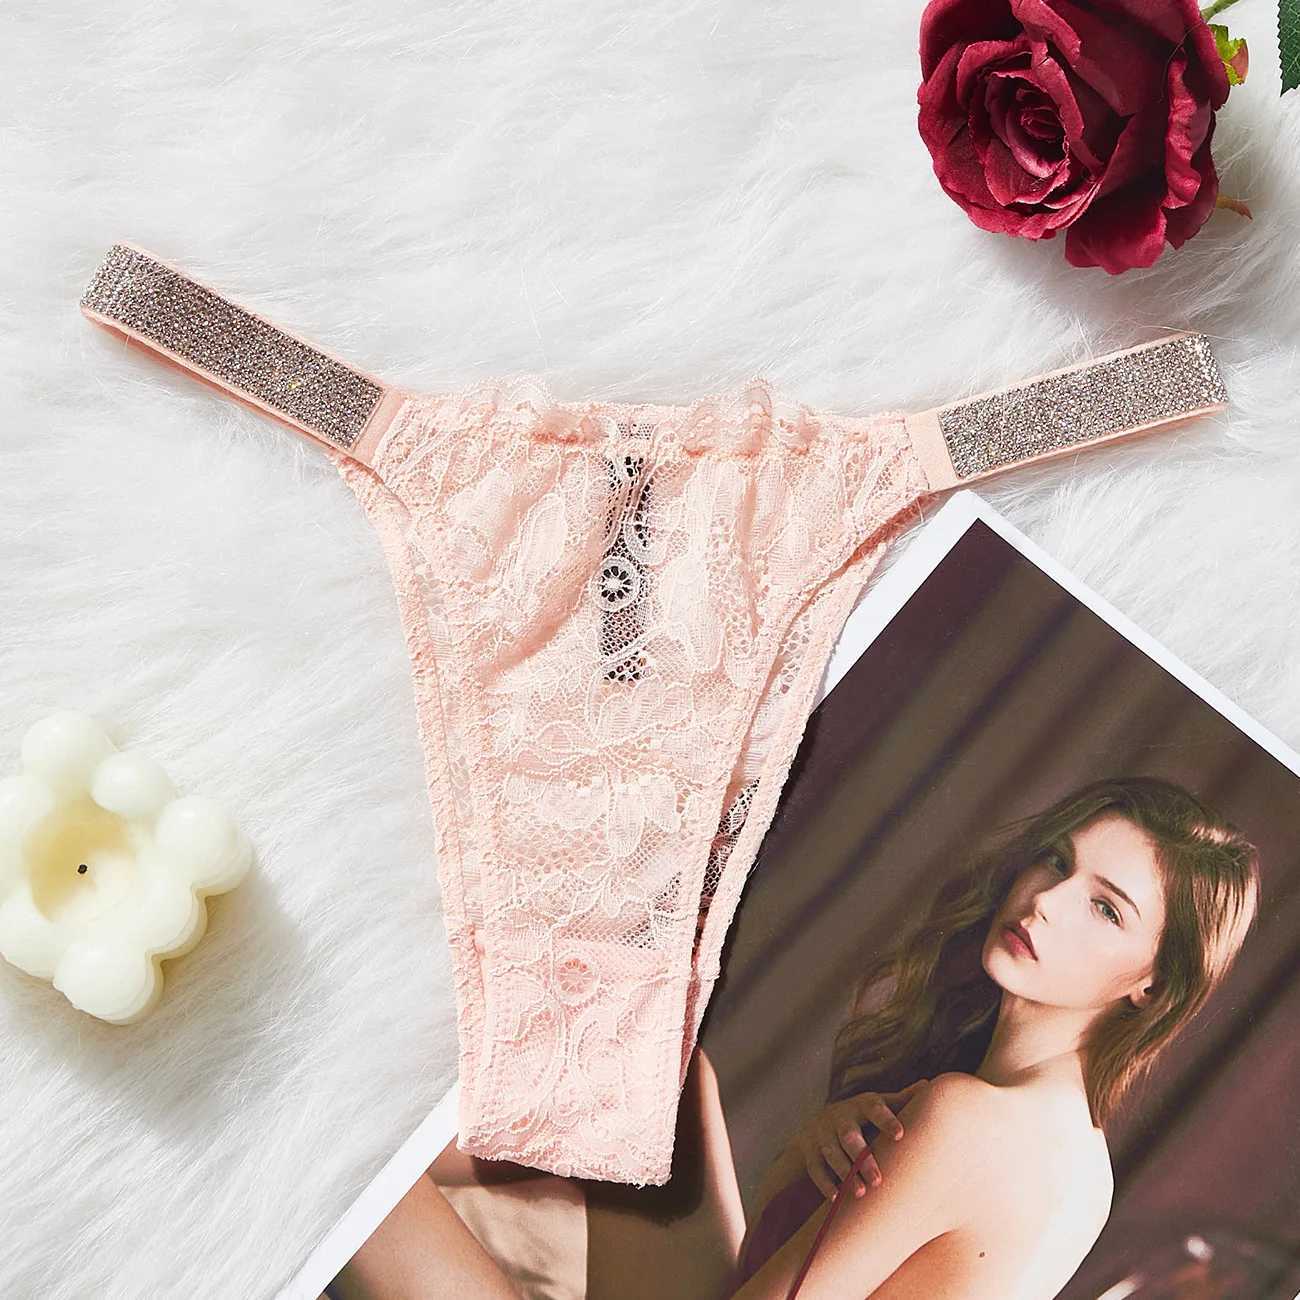 Other Panties Womens Panties Brand Ladies Briefs Letter G String Thong Sexy Womens Underwear Lace Comfortable Bra Pink Water Diamond Plus Size piece IntimateL2403